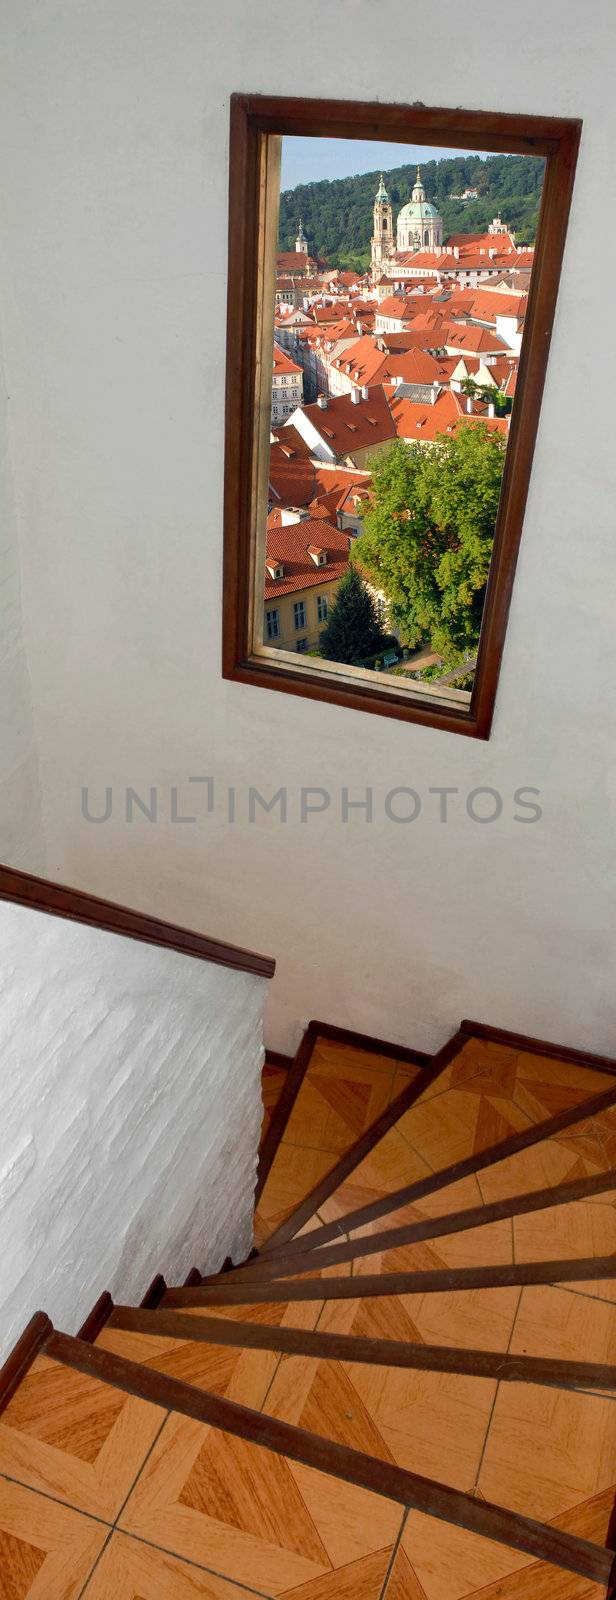 Stairway with window view by cienpies